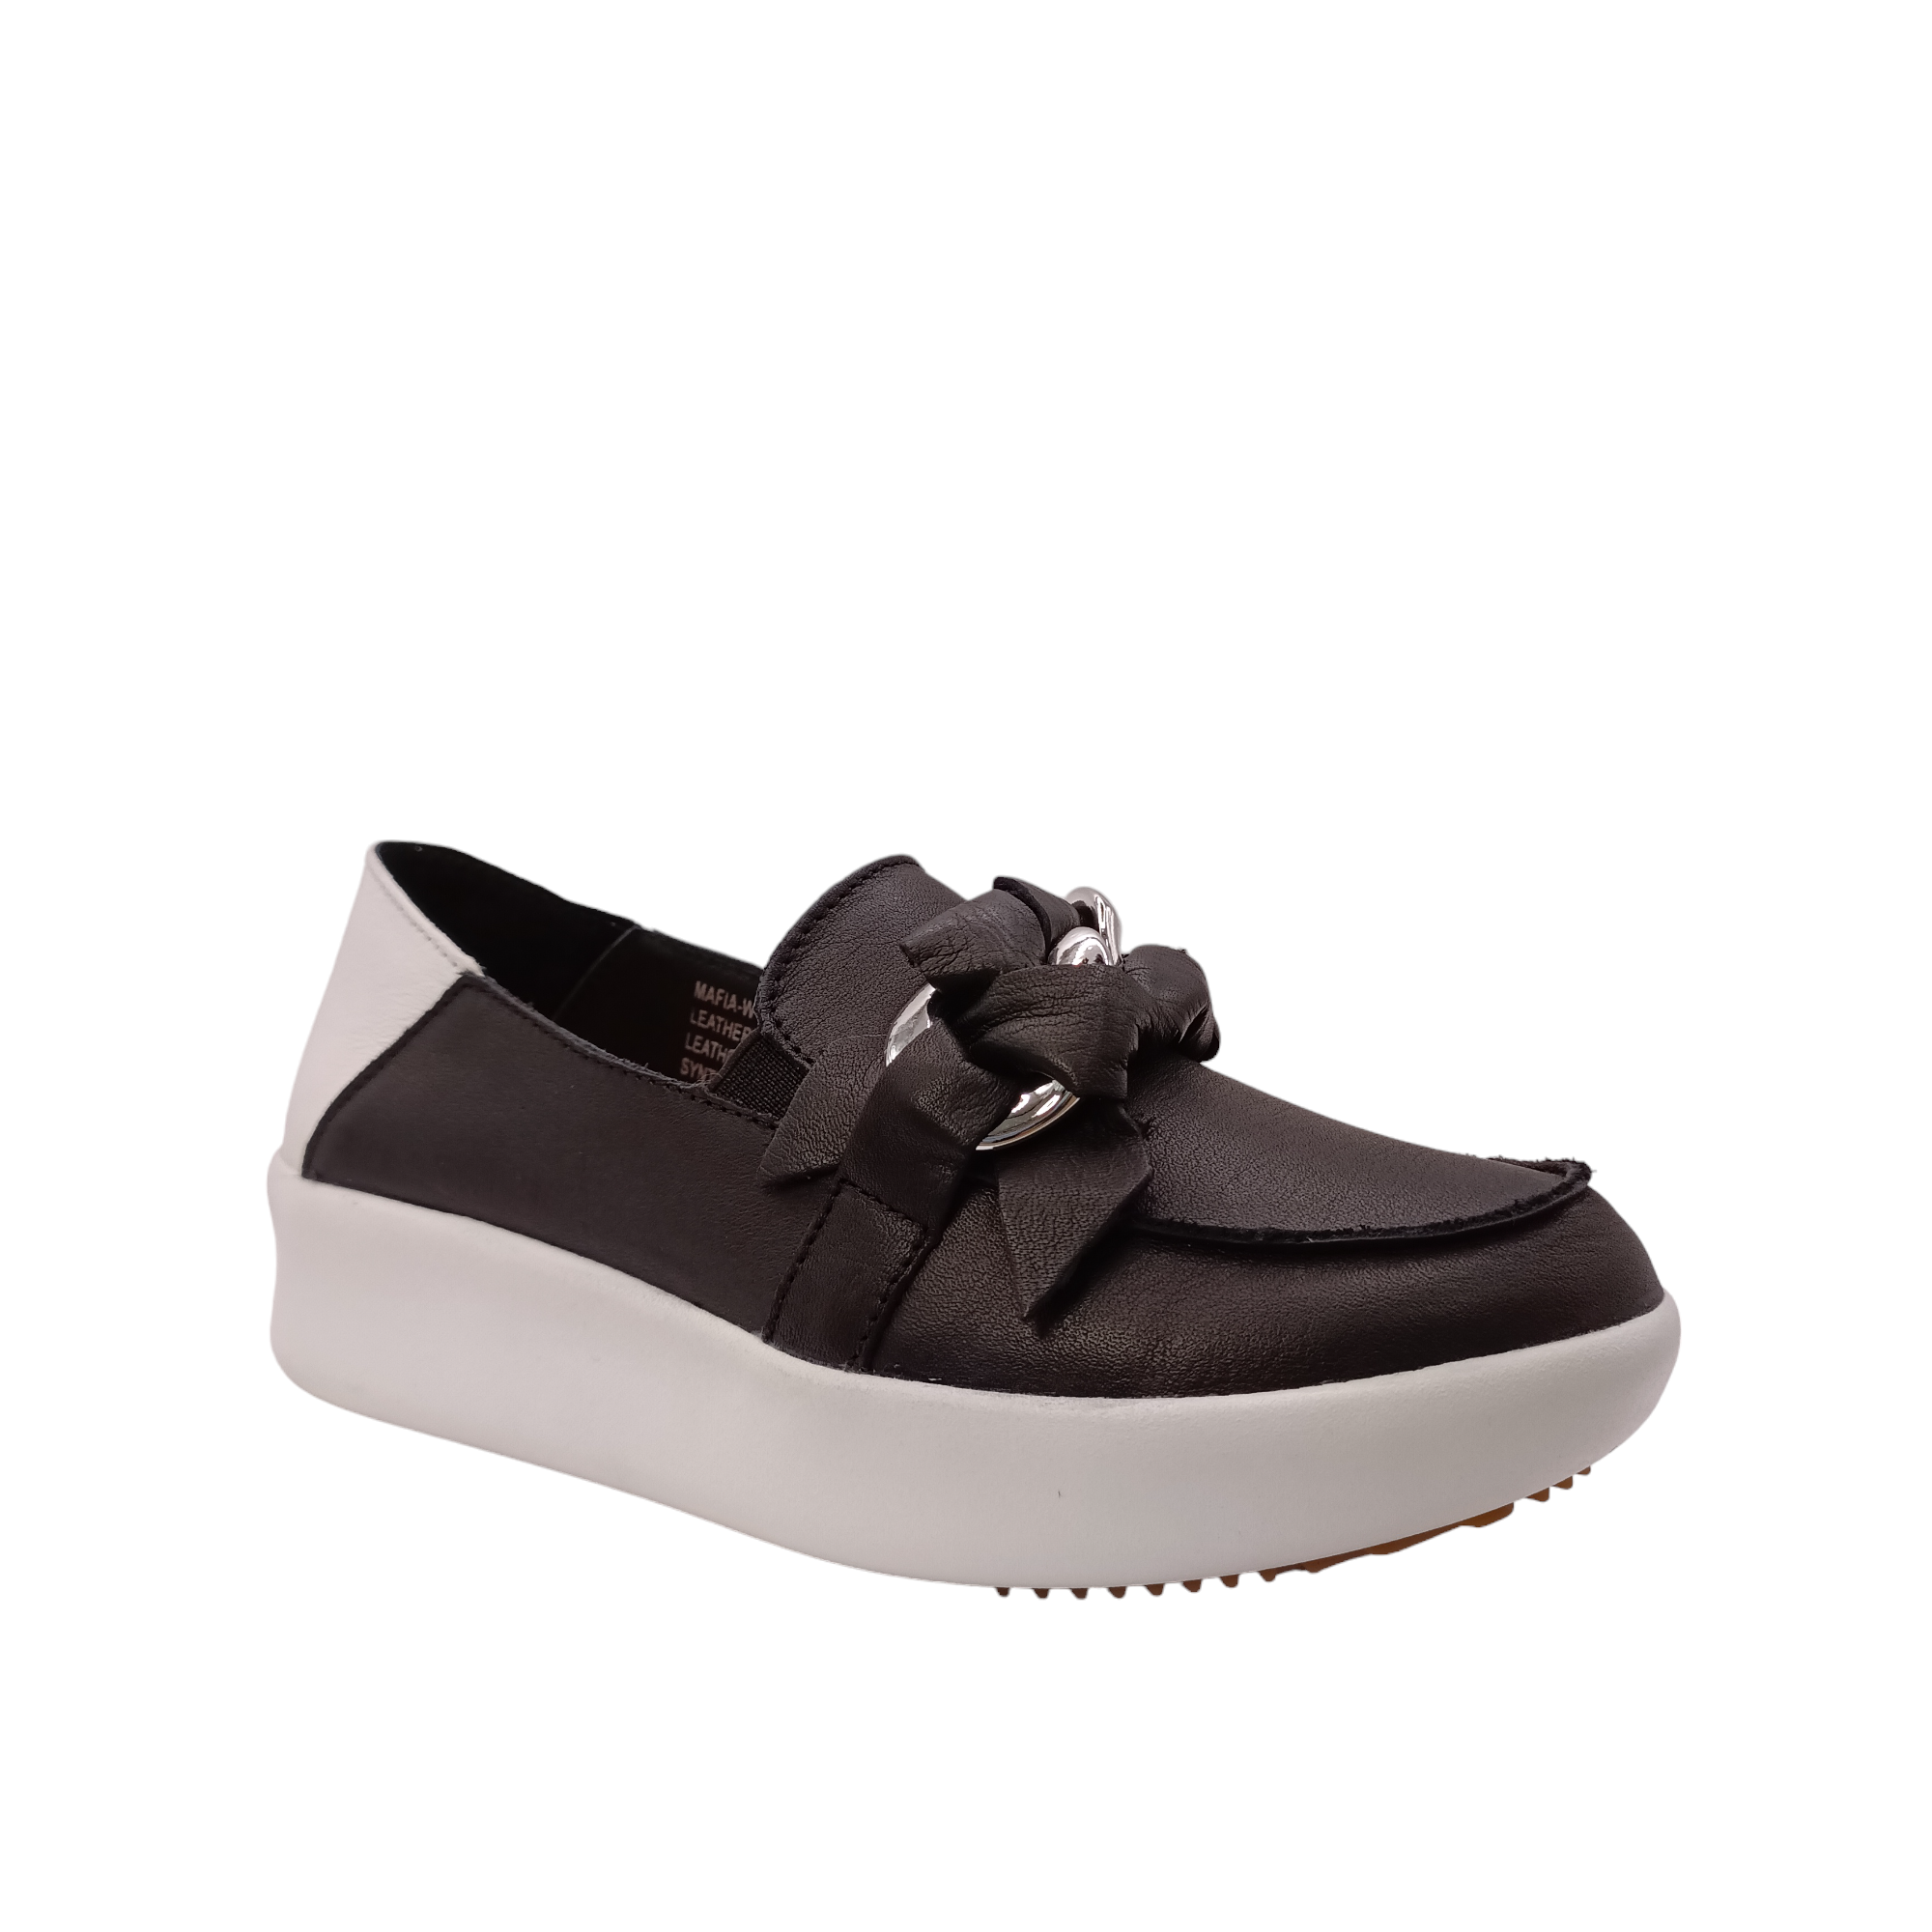 Side angled view of black slip on shoe called mafia from Alfie &amp; Evie. Black leather laced in silver chain decorating the top, white leather heel with a white sole. Shop Alfie &amp; Evie Womens Shoes online and In-Store with shoe&amp;me Mount Maunganui.